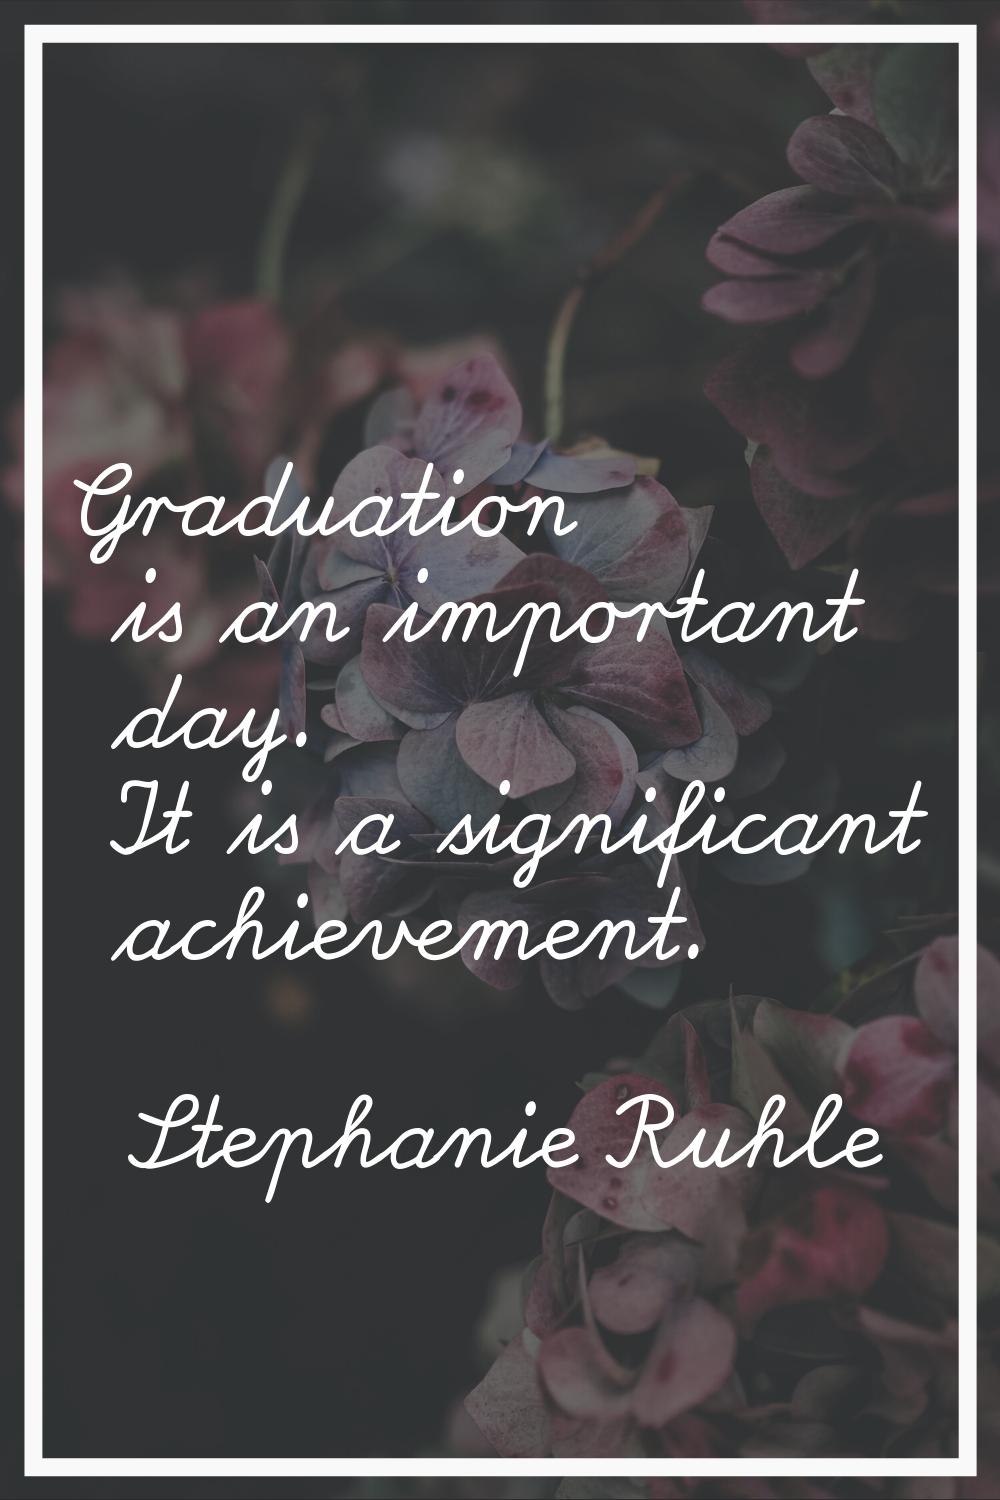 Graduation is an important day. It is a significant achievement.